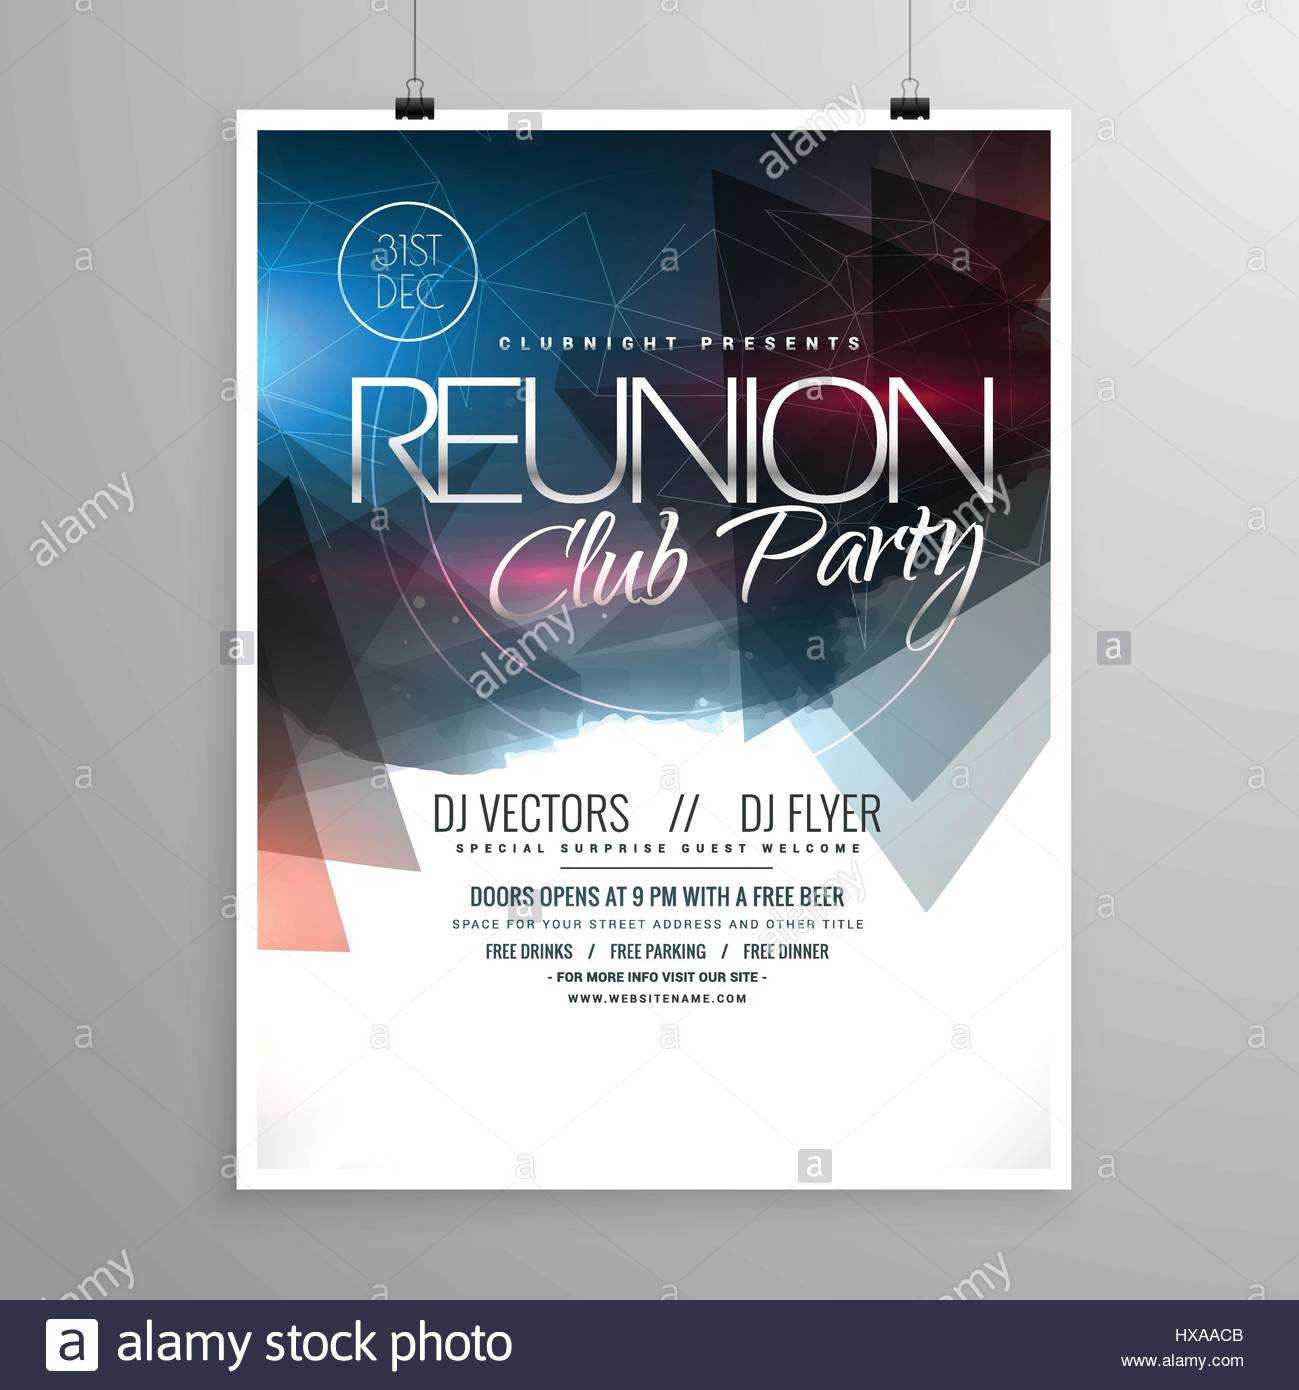 Event Club Party Flyer Template Brochure Design Stock Vector Inside Welcome Brochure Template